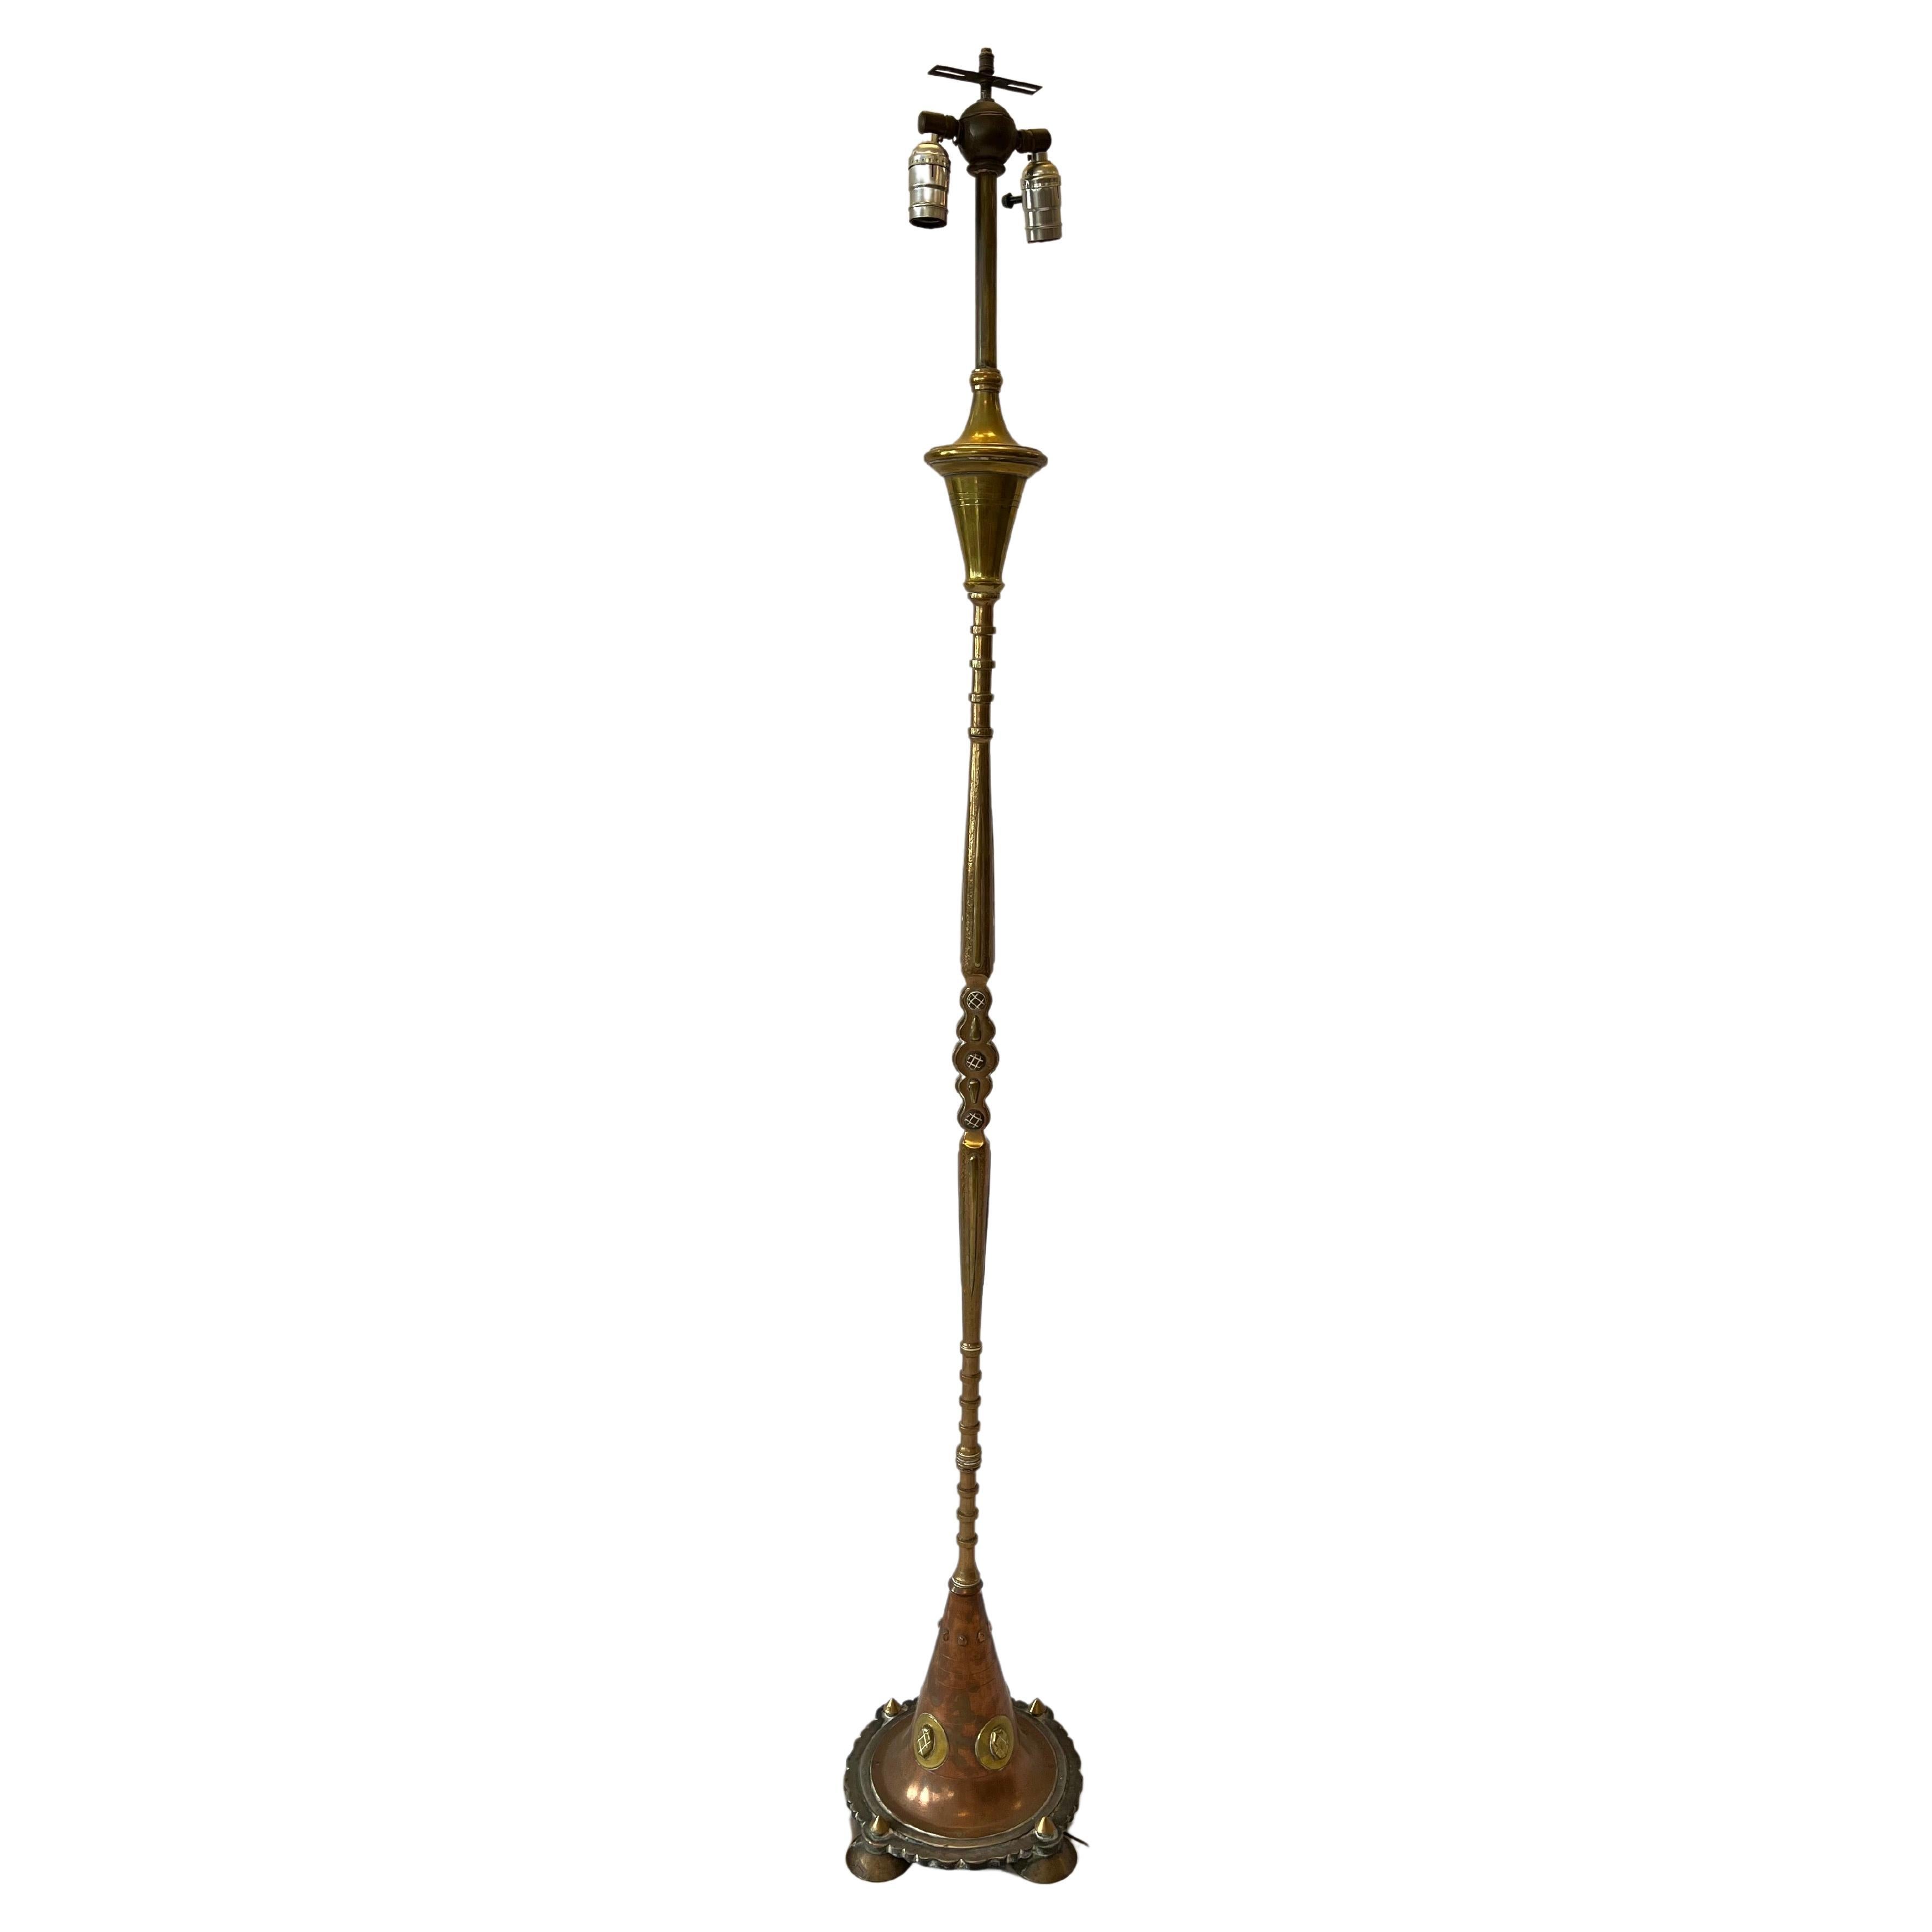 Antique Copper Brass Mixed Metal Ornate Moorish Style Hand Crafted Floor Lamp For Sale